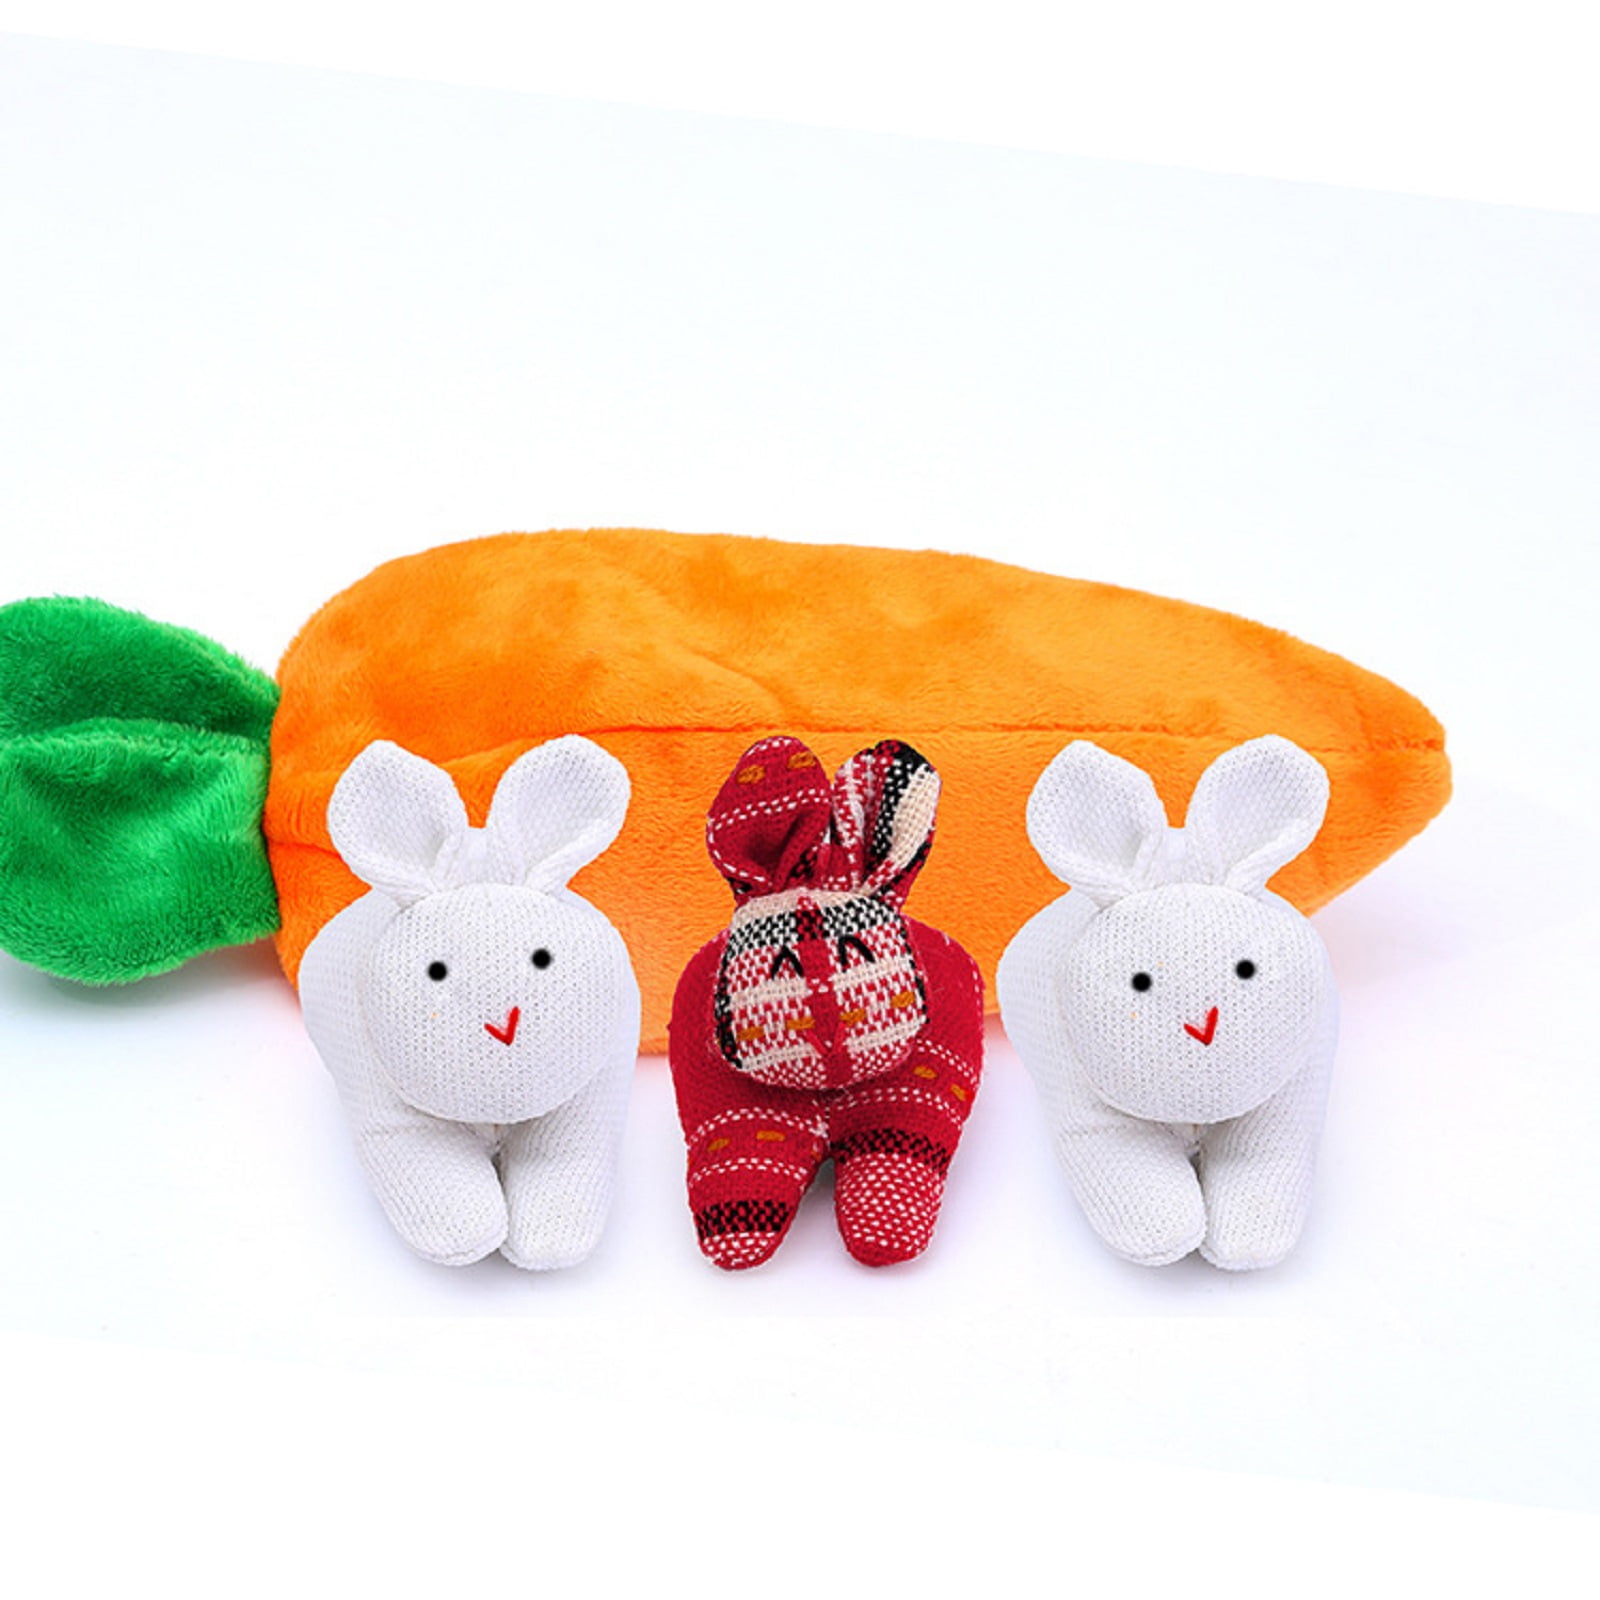 Perfect for Easter Gift and Easter Basket Plush Bunny Rabbit with Zippered Pouch for Little Baby Bunnies Easter Bunny Stuffed Animal Bunny Stuffed Animal 